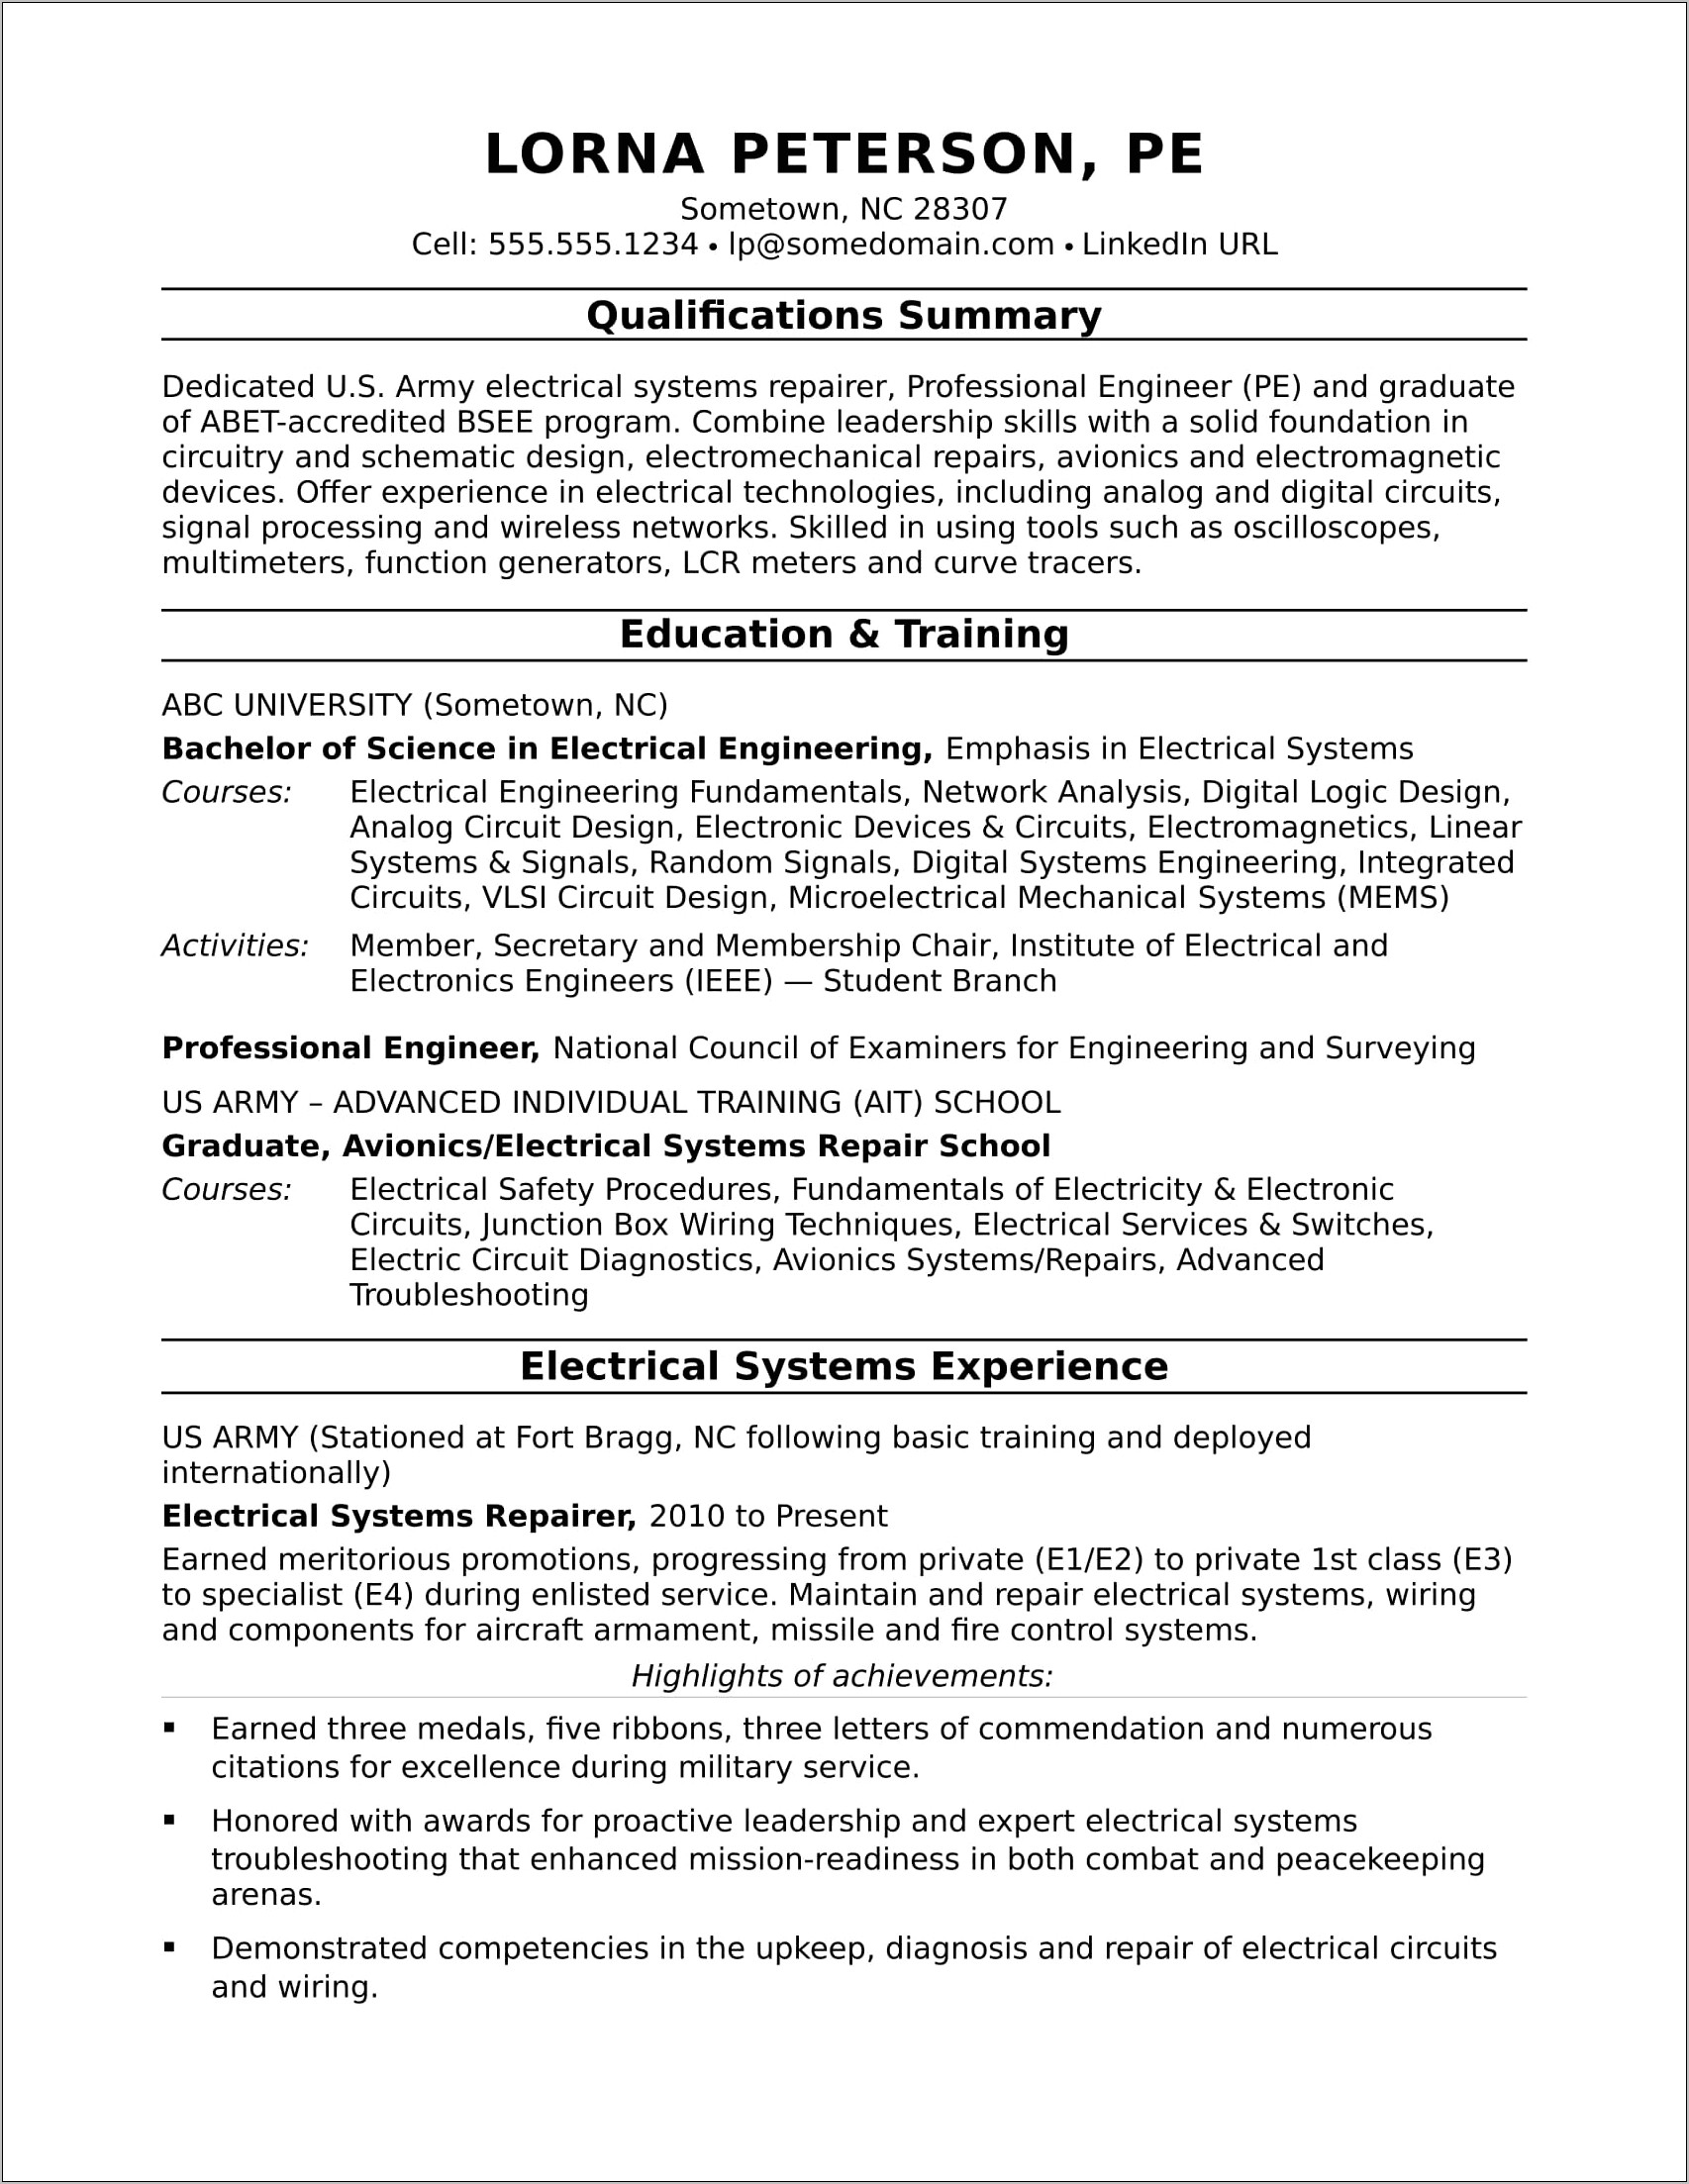 Resume Objective For Electrical Engineer Sample